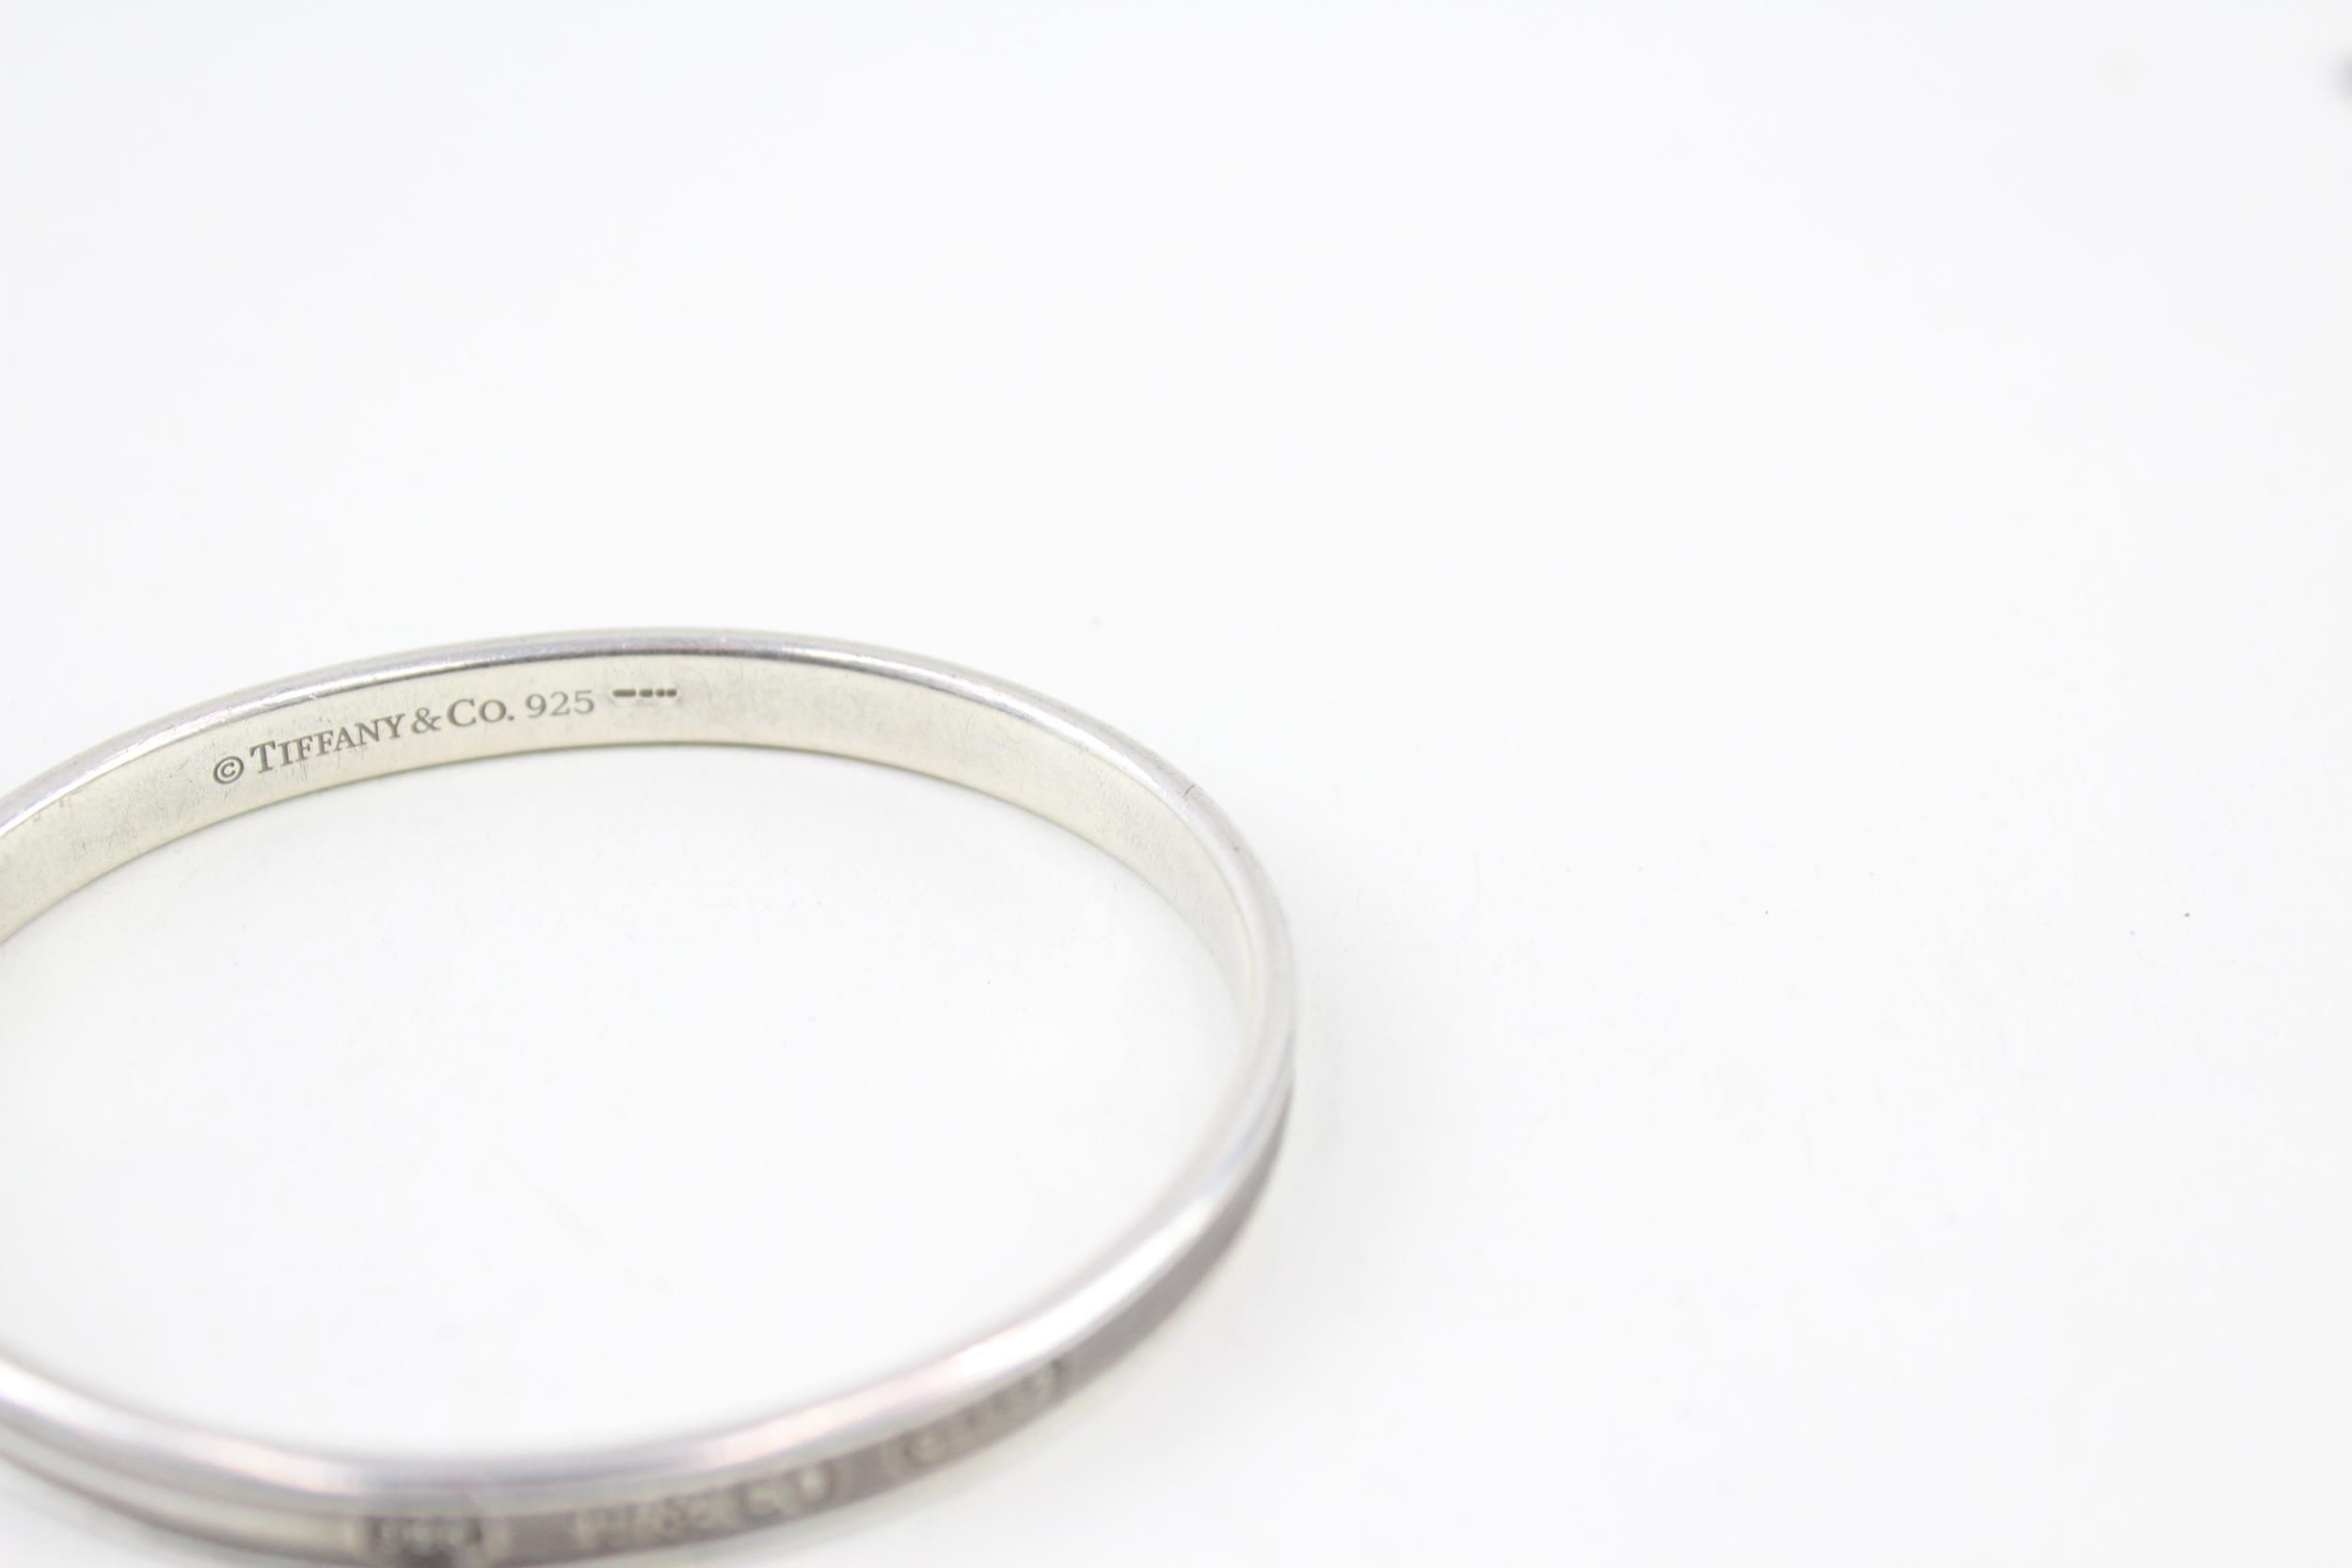 Silver bangle by designer Tiffany & Co (32g) - Image 9 of 12